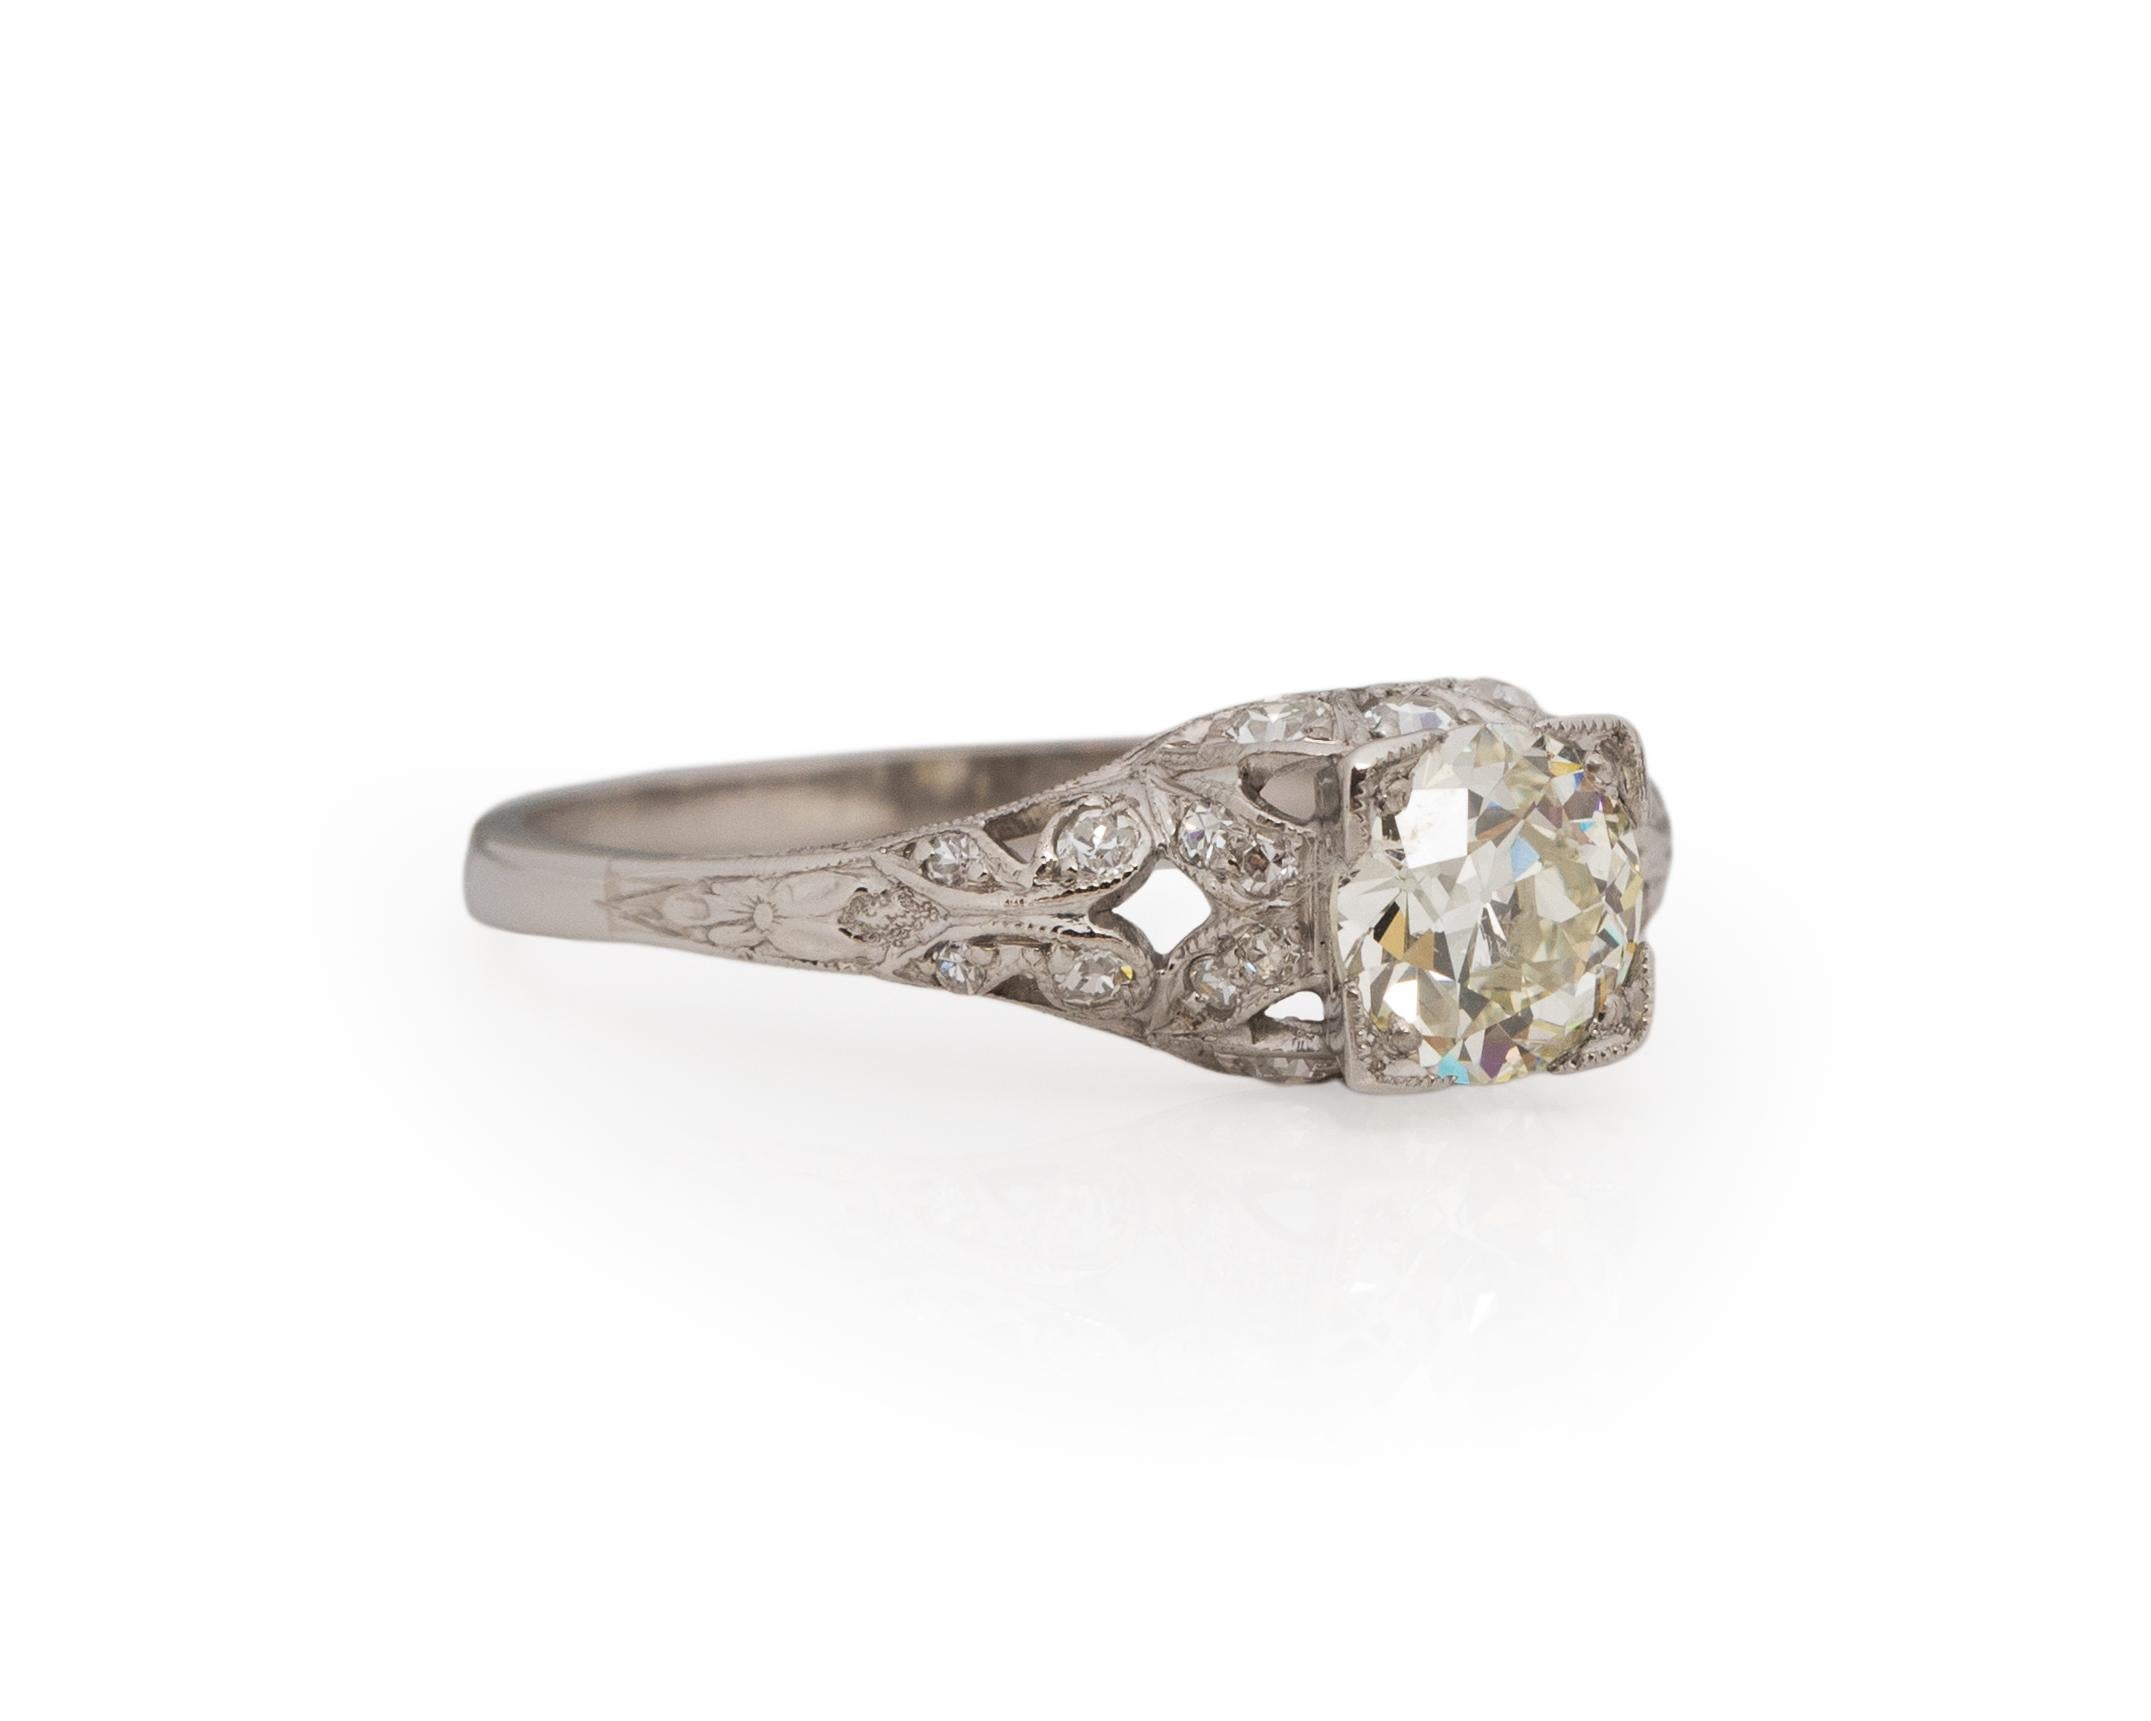 Ring Size: 9.5
Metal Type: Platinum [Hallmarked, and Tested]
Weight: 4.0 grams

Center Diamond Details:
GIA REPORT #: 5222375016
Weight: 1.00ct
Cut: Old European brilliant
Color: M
Clarity: VVS2
Measurements: 6.45mm x 6.38mm x 3.75mm

Side Stone